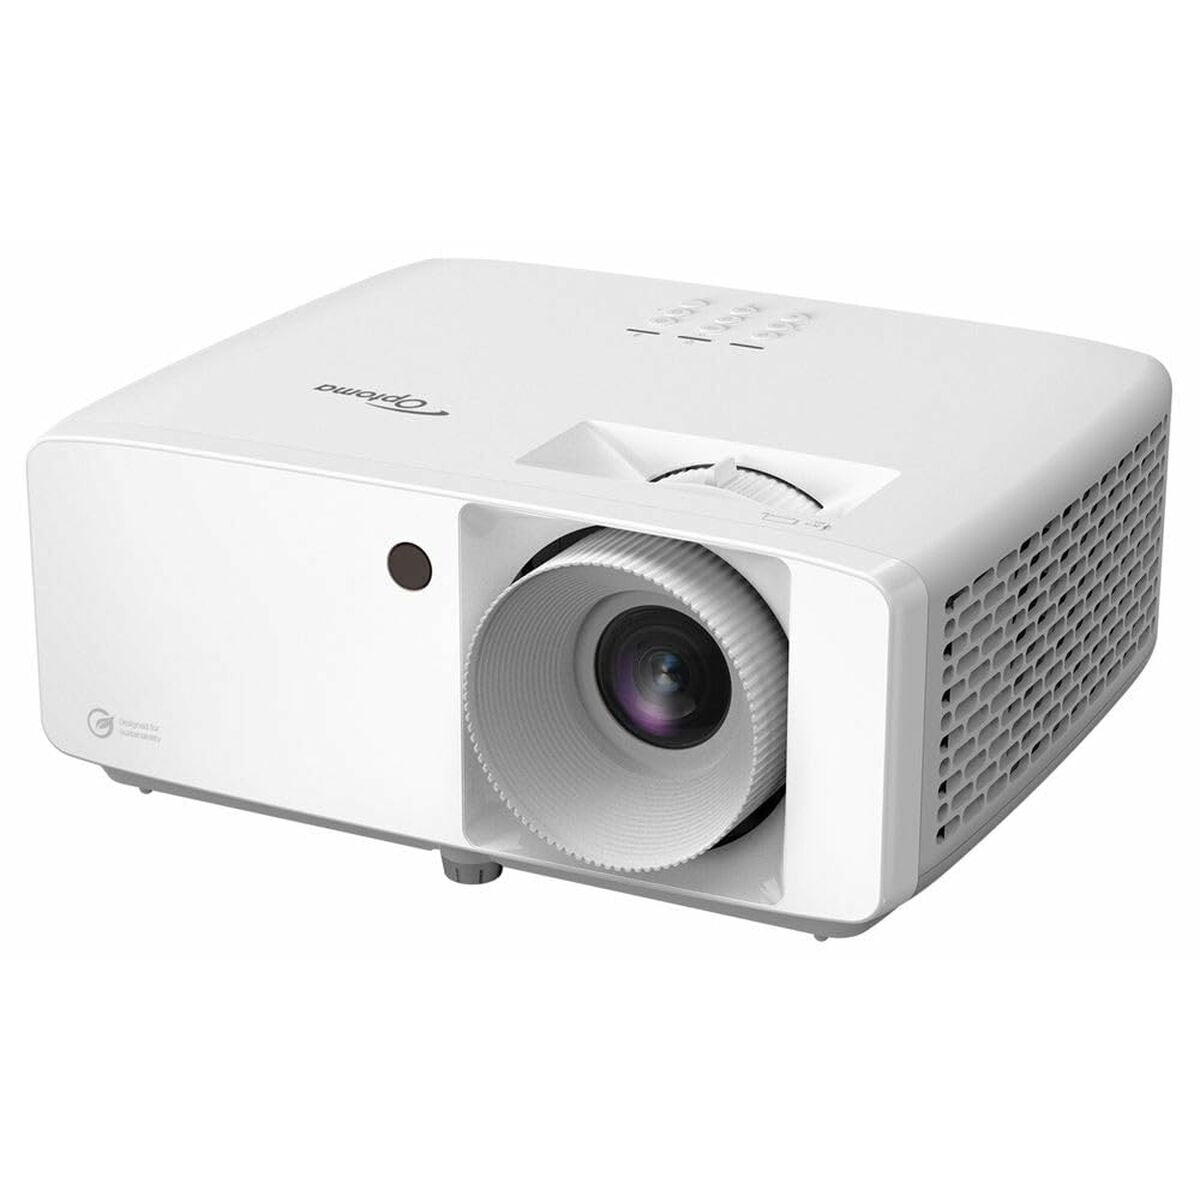 Projector Optoma ZH462 5000 Lm 1920 x 1080 px, Optoma, Electronics, TV, Video and home cinema, projector-optoma-zh462-5000-lm-1920-x-1080-px, Brand_Optoma, category-reference-2609, category-reference-2642, category-reference-2947, category-reference-t-18805, category-reference-t-18811, category-reference-t-19653, cinema and television, computers / peripherals, Condition_NEW, entertainment, office, Price_+ 1000, RiotNook